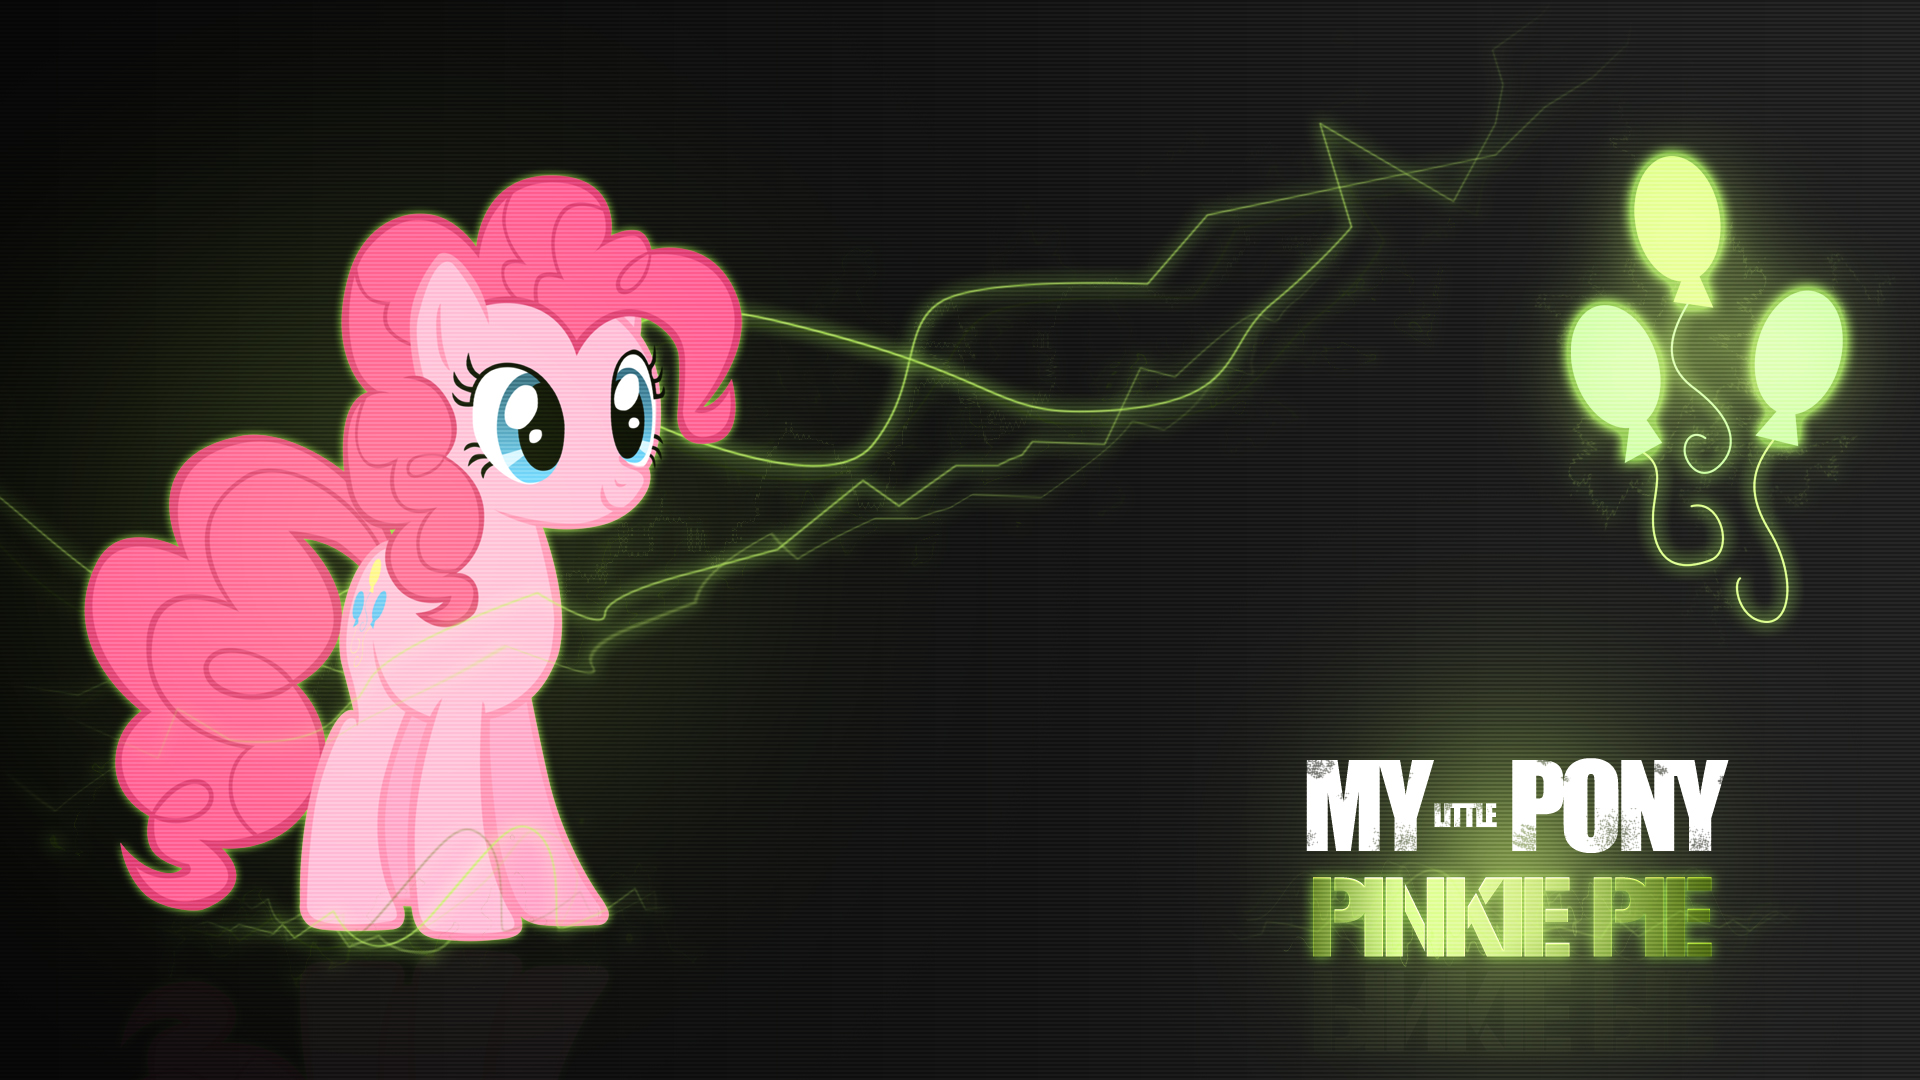 MWallaper - Pinkie Pie by BlackGryph0n, ikillyou121 and Mackaged